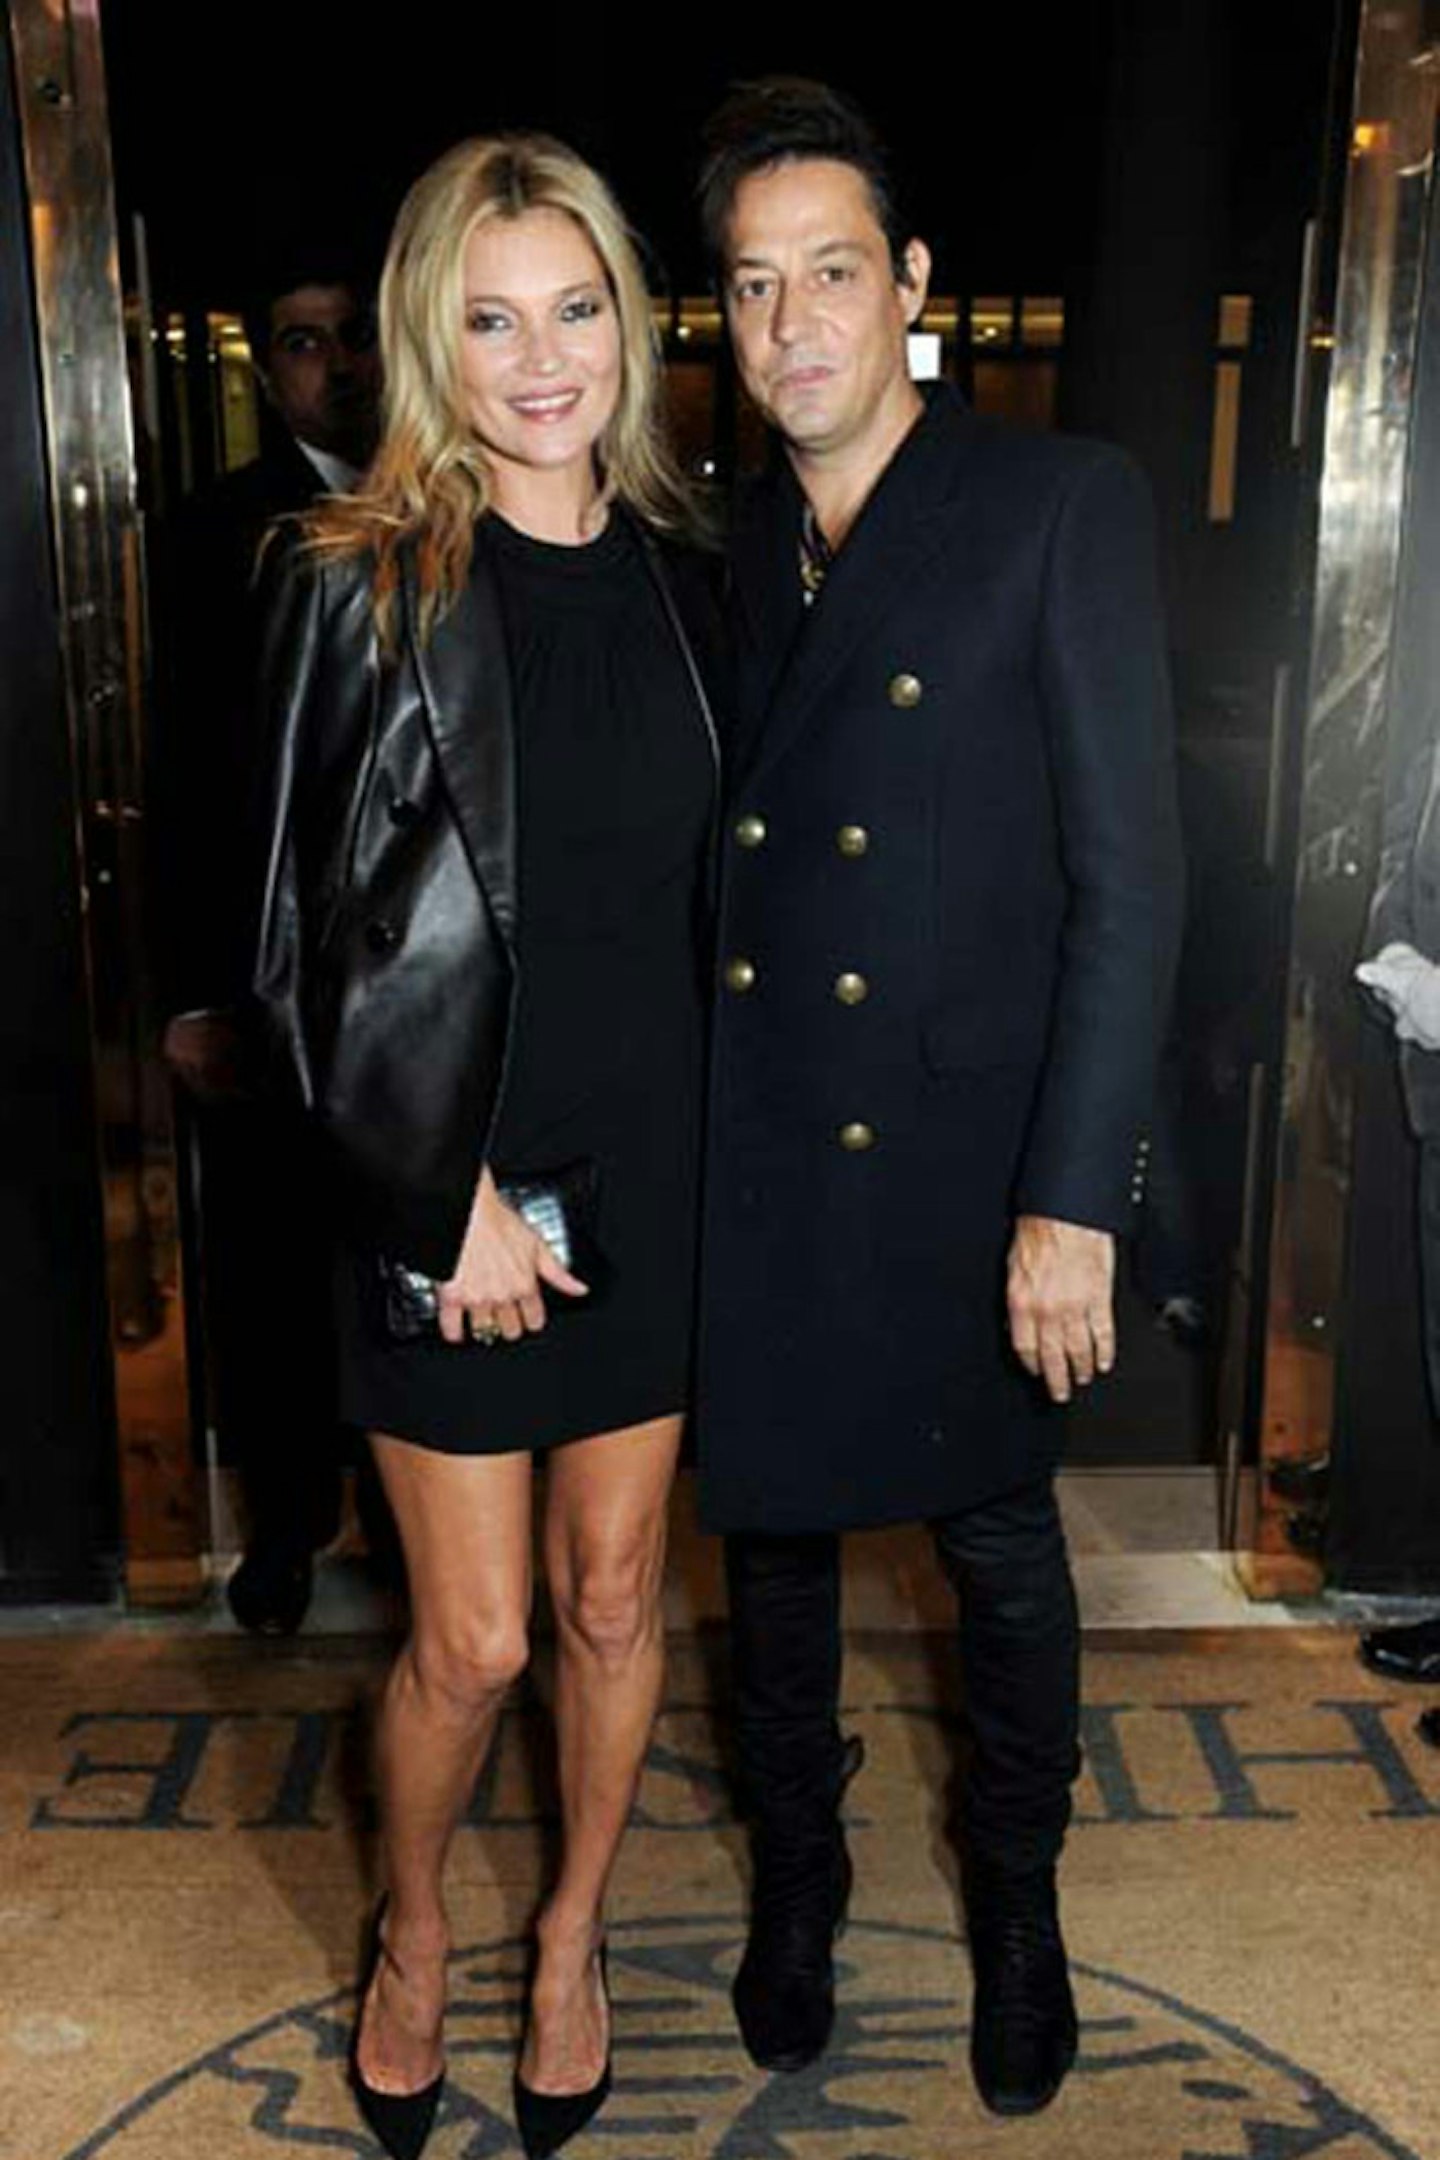 Kate Moss in Saint Laurent at Kate Moss Christie's auction private view, London, 20 September 2013